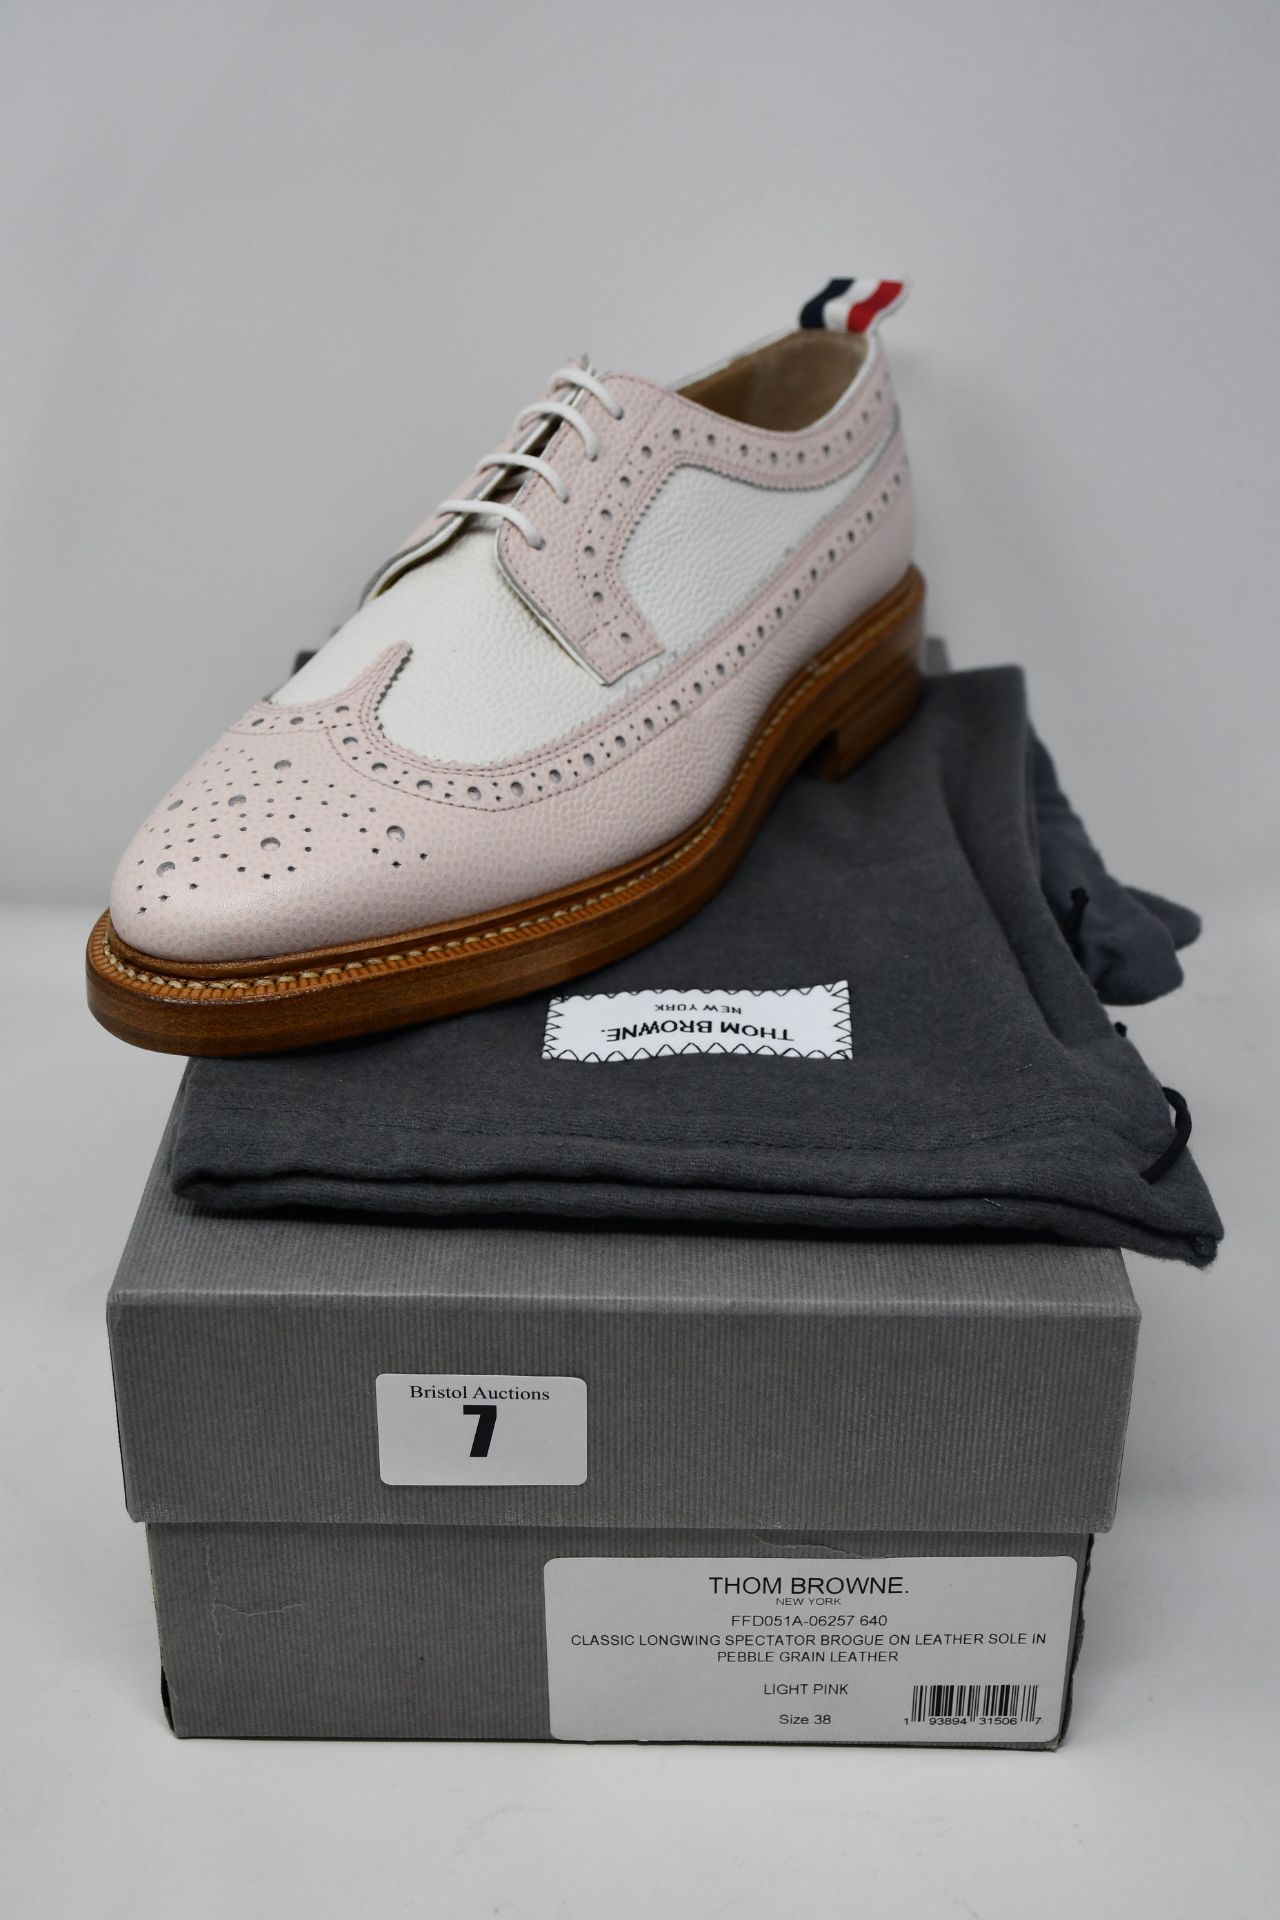 One as new Thom Browne Longwing Spectator Brogue shoes in light pink (EU size 38).